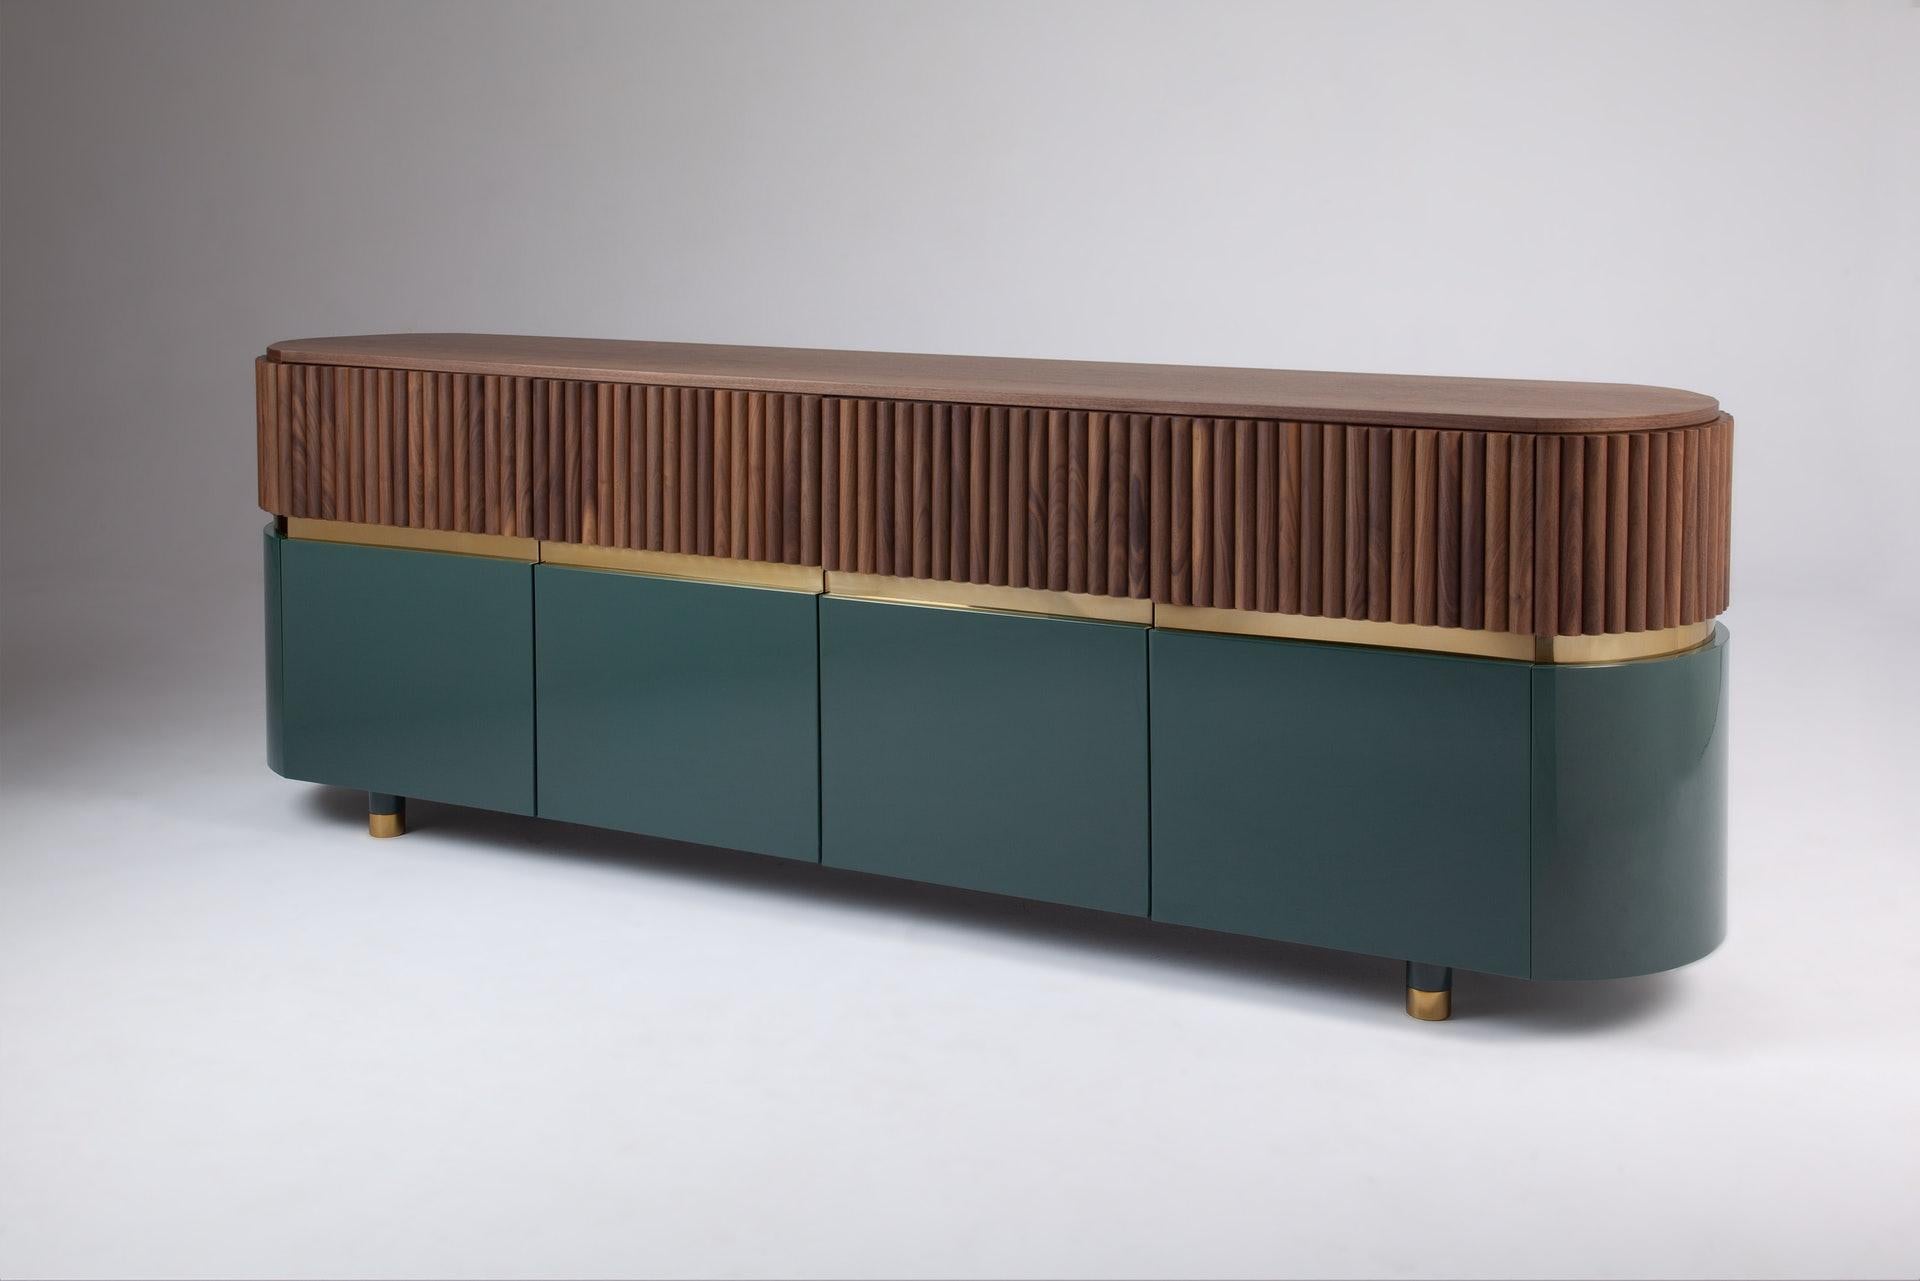 Berlin Contemporary sideboard by Dooq
Dimensions: W 250 x D 50 x H 78 cm
Materials: MDF, Marble, Natural Walnut Veneer, Stainless Steel Plated Polished Copper, Feet: Stainless Steel Plated Polished Copper

Metropolis Sideboard was created embodying